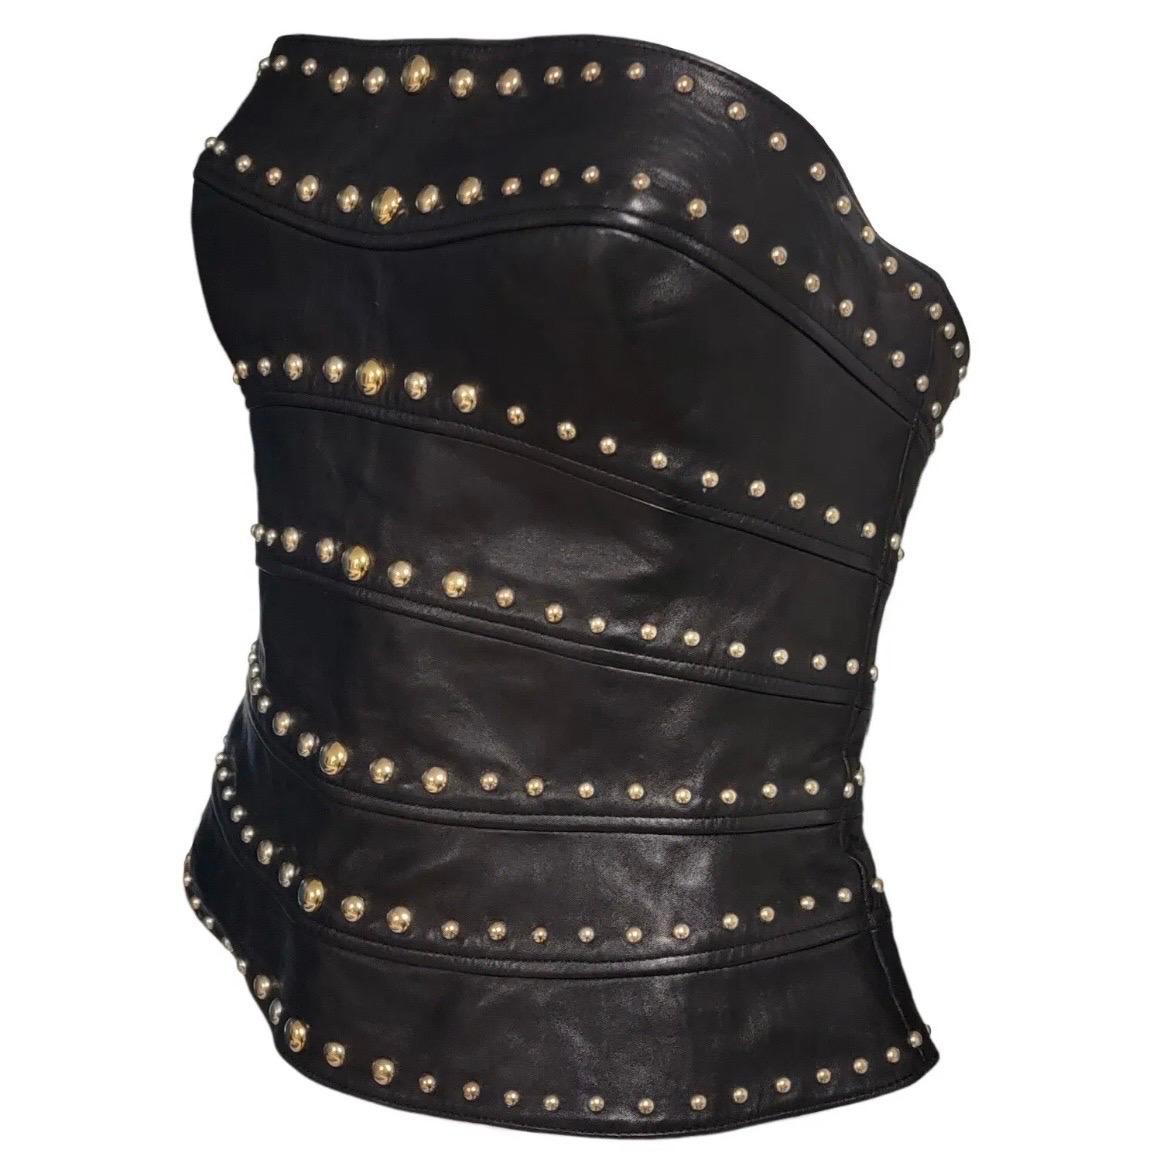 1990s Thierry Mugler Black Leather Studded Strapless Bustier Corset In Excellent Condition For Sale In Concord, NC